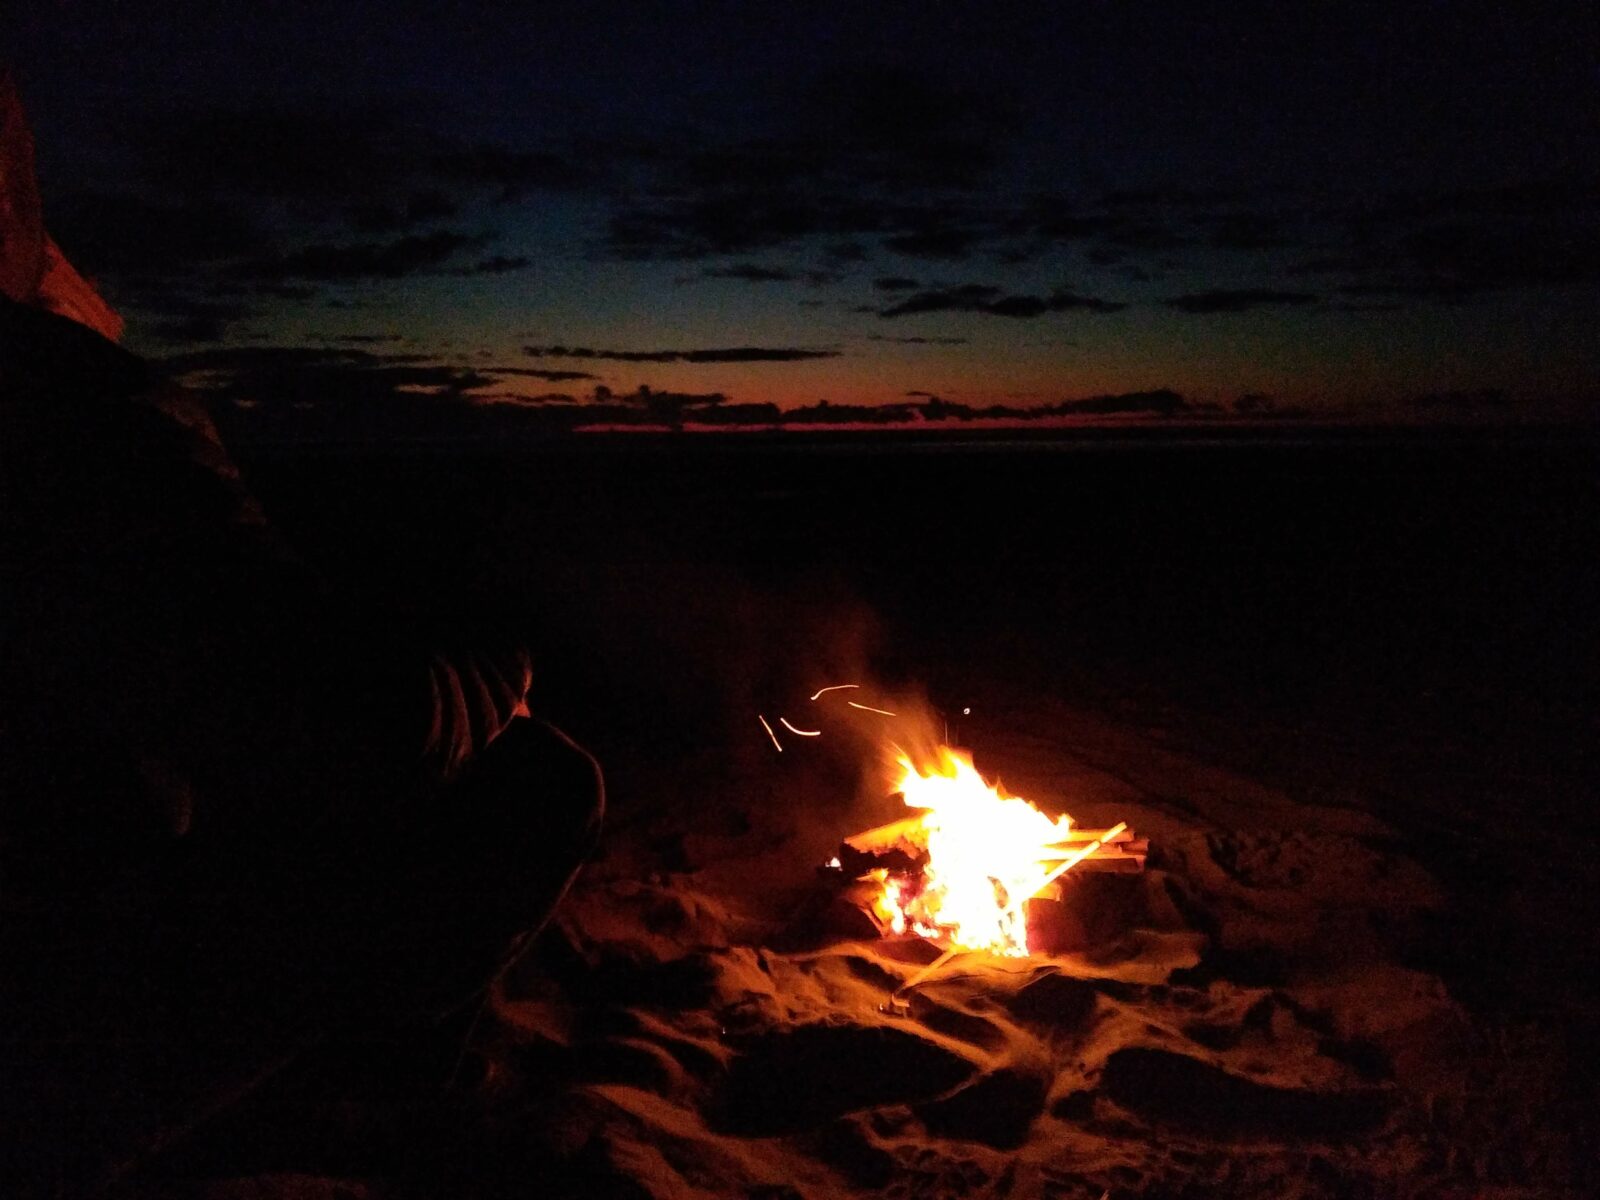 A fire in the sand on the beach after sunset. There is still a bit of sunset color on the horizon